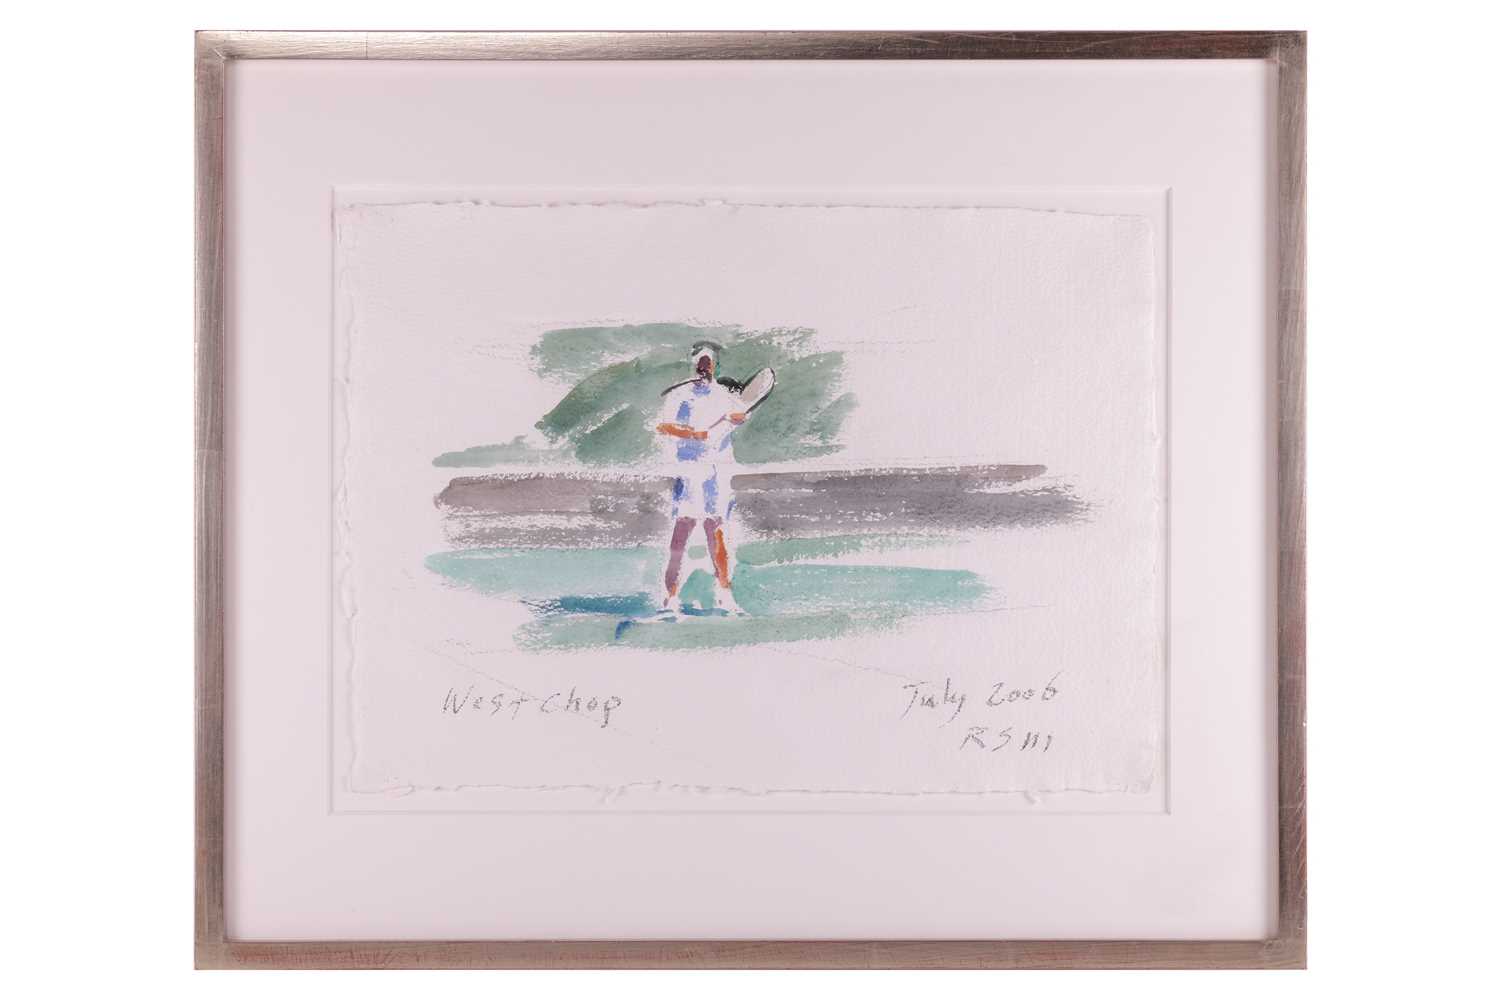 R.S. (American, Contemporary) Tennis Player, titled in Pencil 'West Chop July 2006', initialled RS a